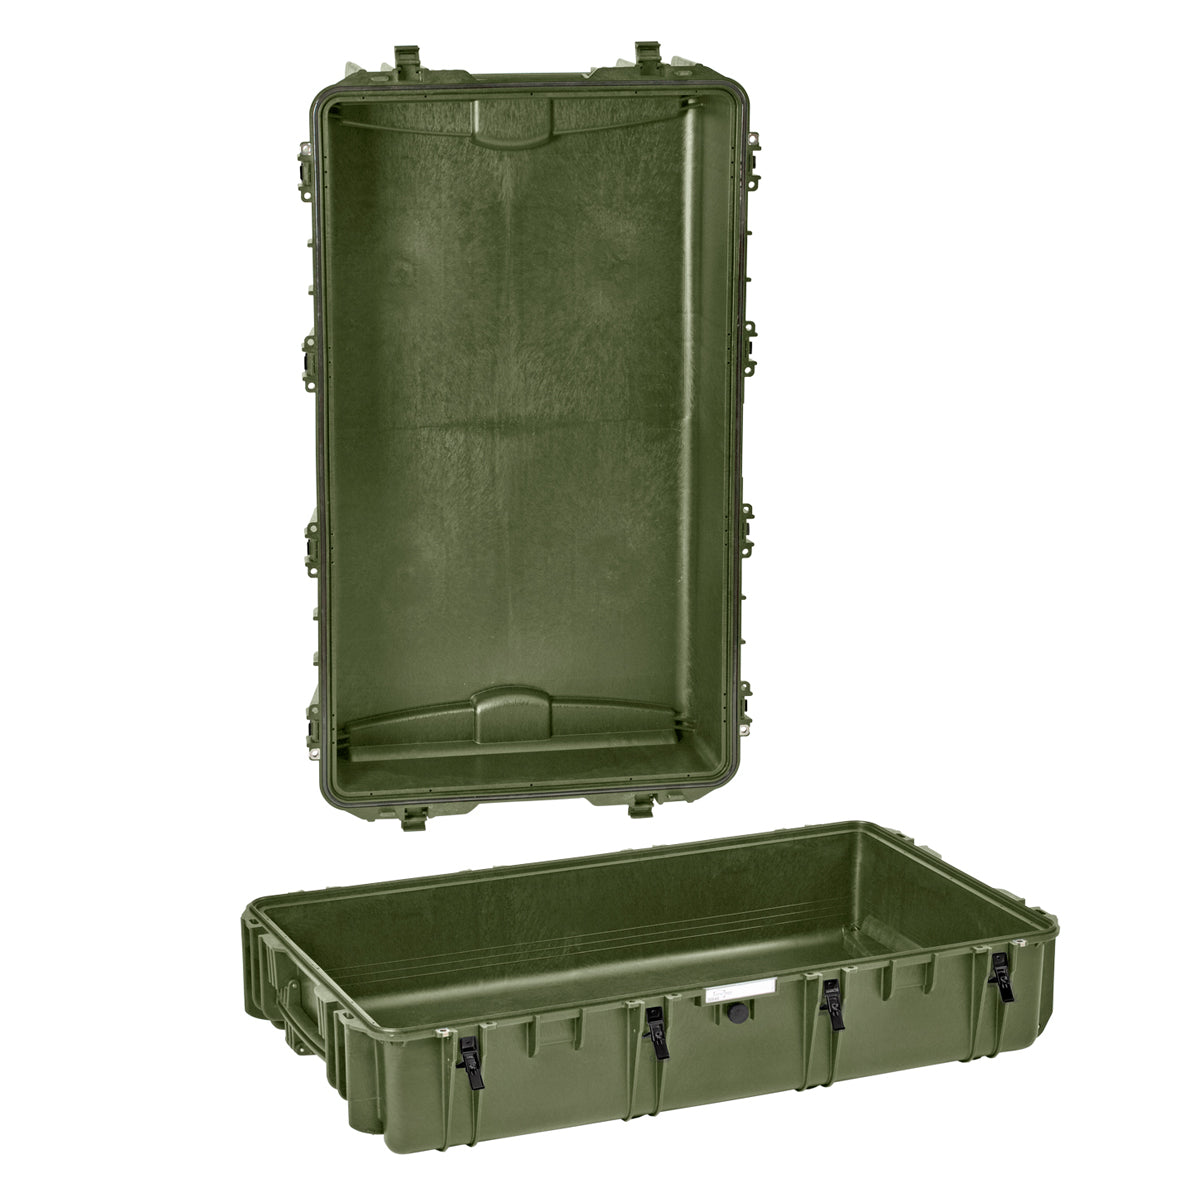 Explorer Cases 10840GE Copolymer Polypropylene Waterproof Case - Military Green Without Foam